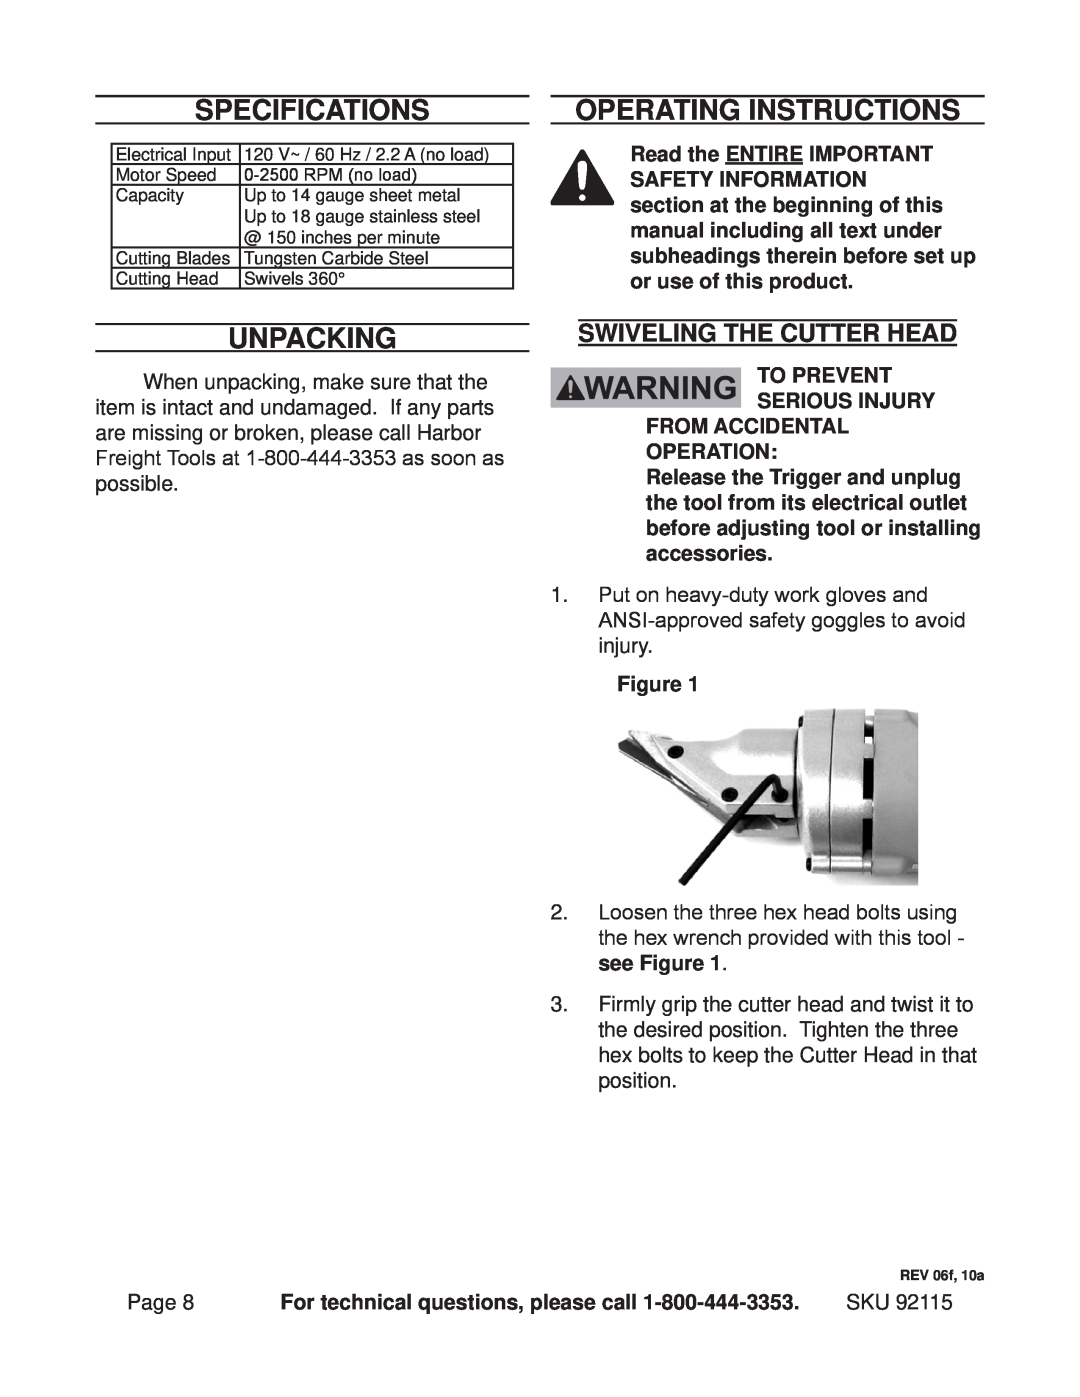 Chicago Electric 92115 operating instructions Specifications, Unpacking, Operating Instructions, Swiveling The Cutter Head 